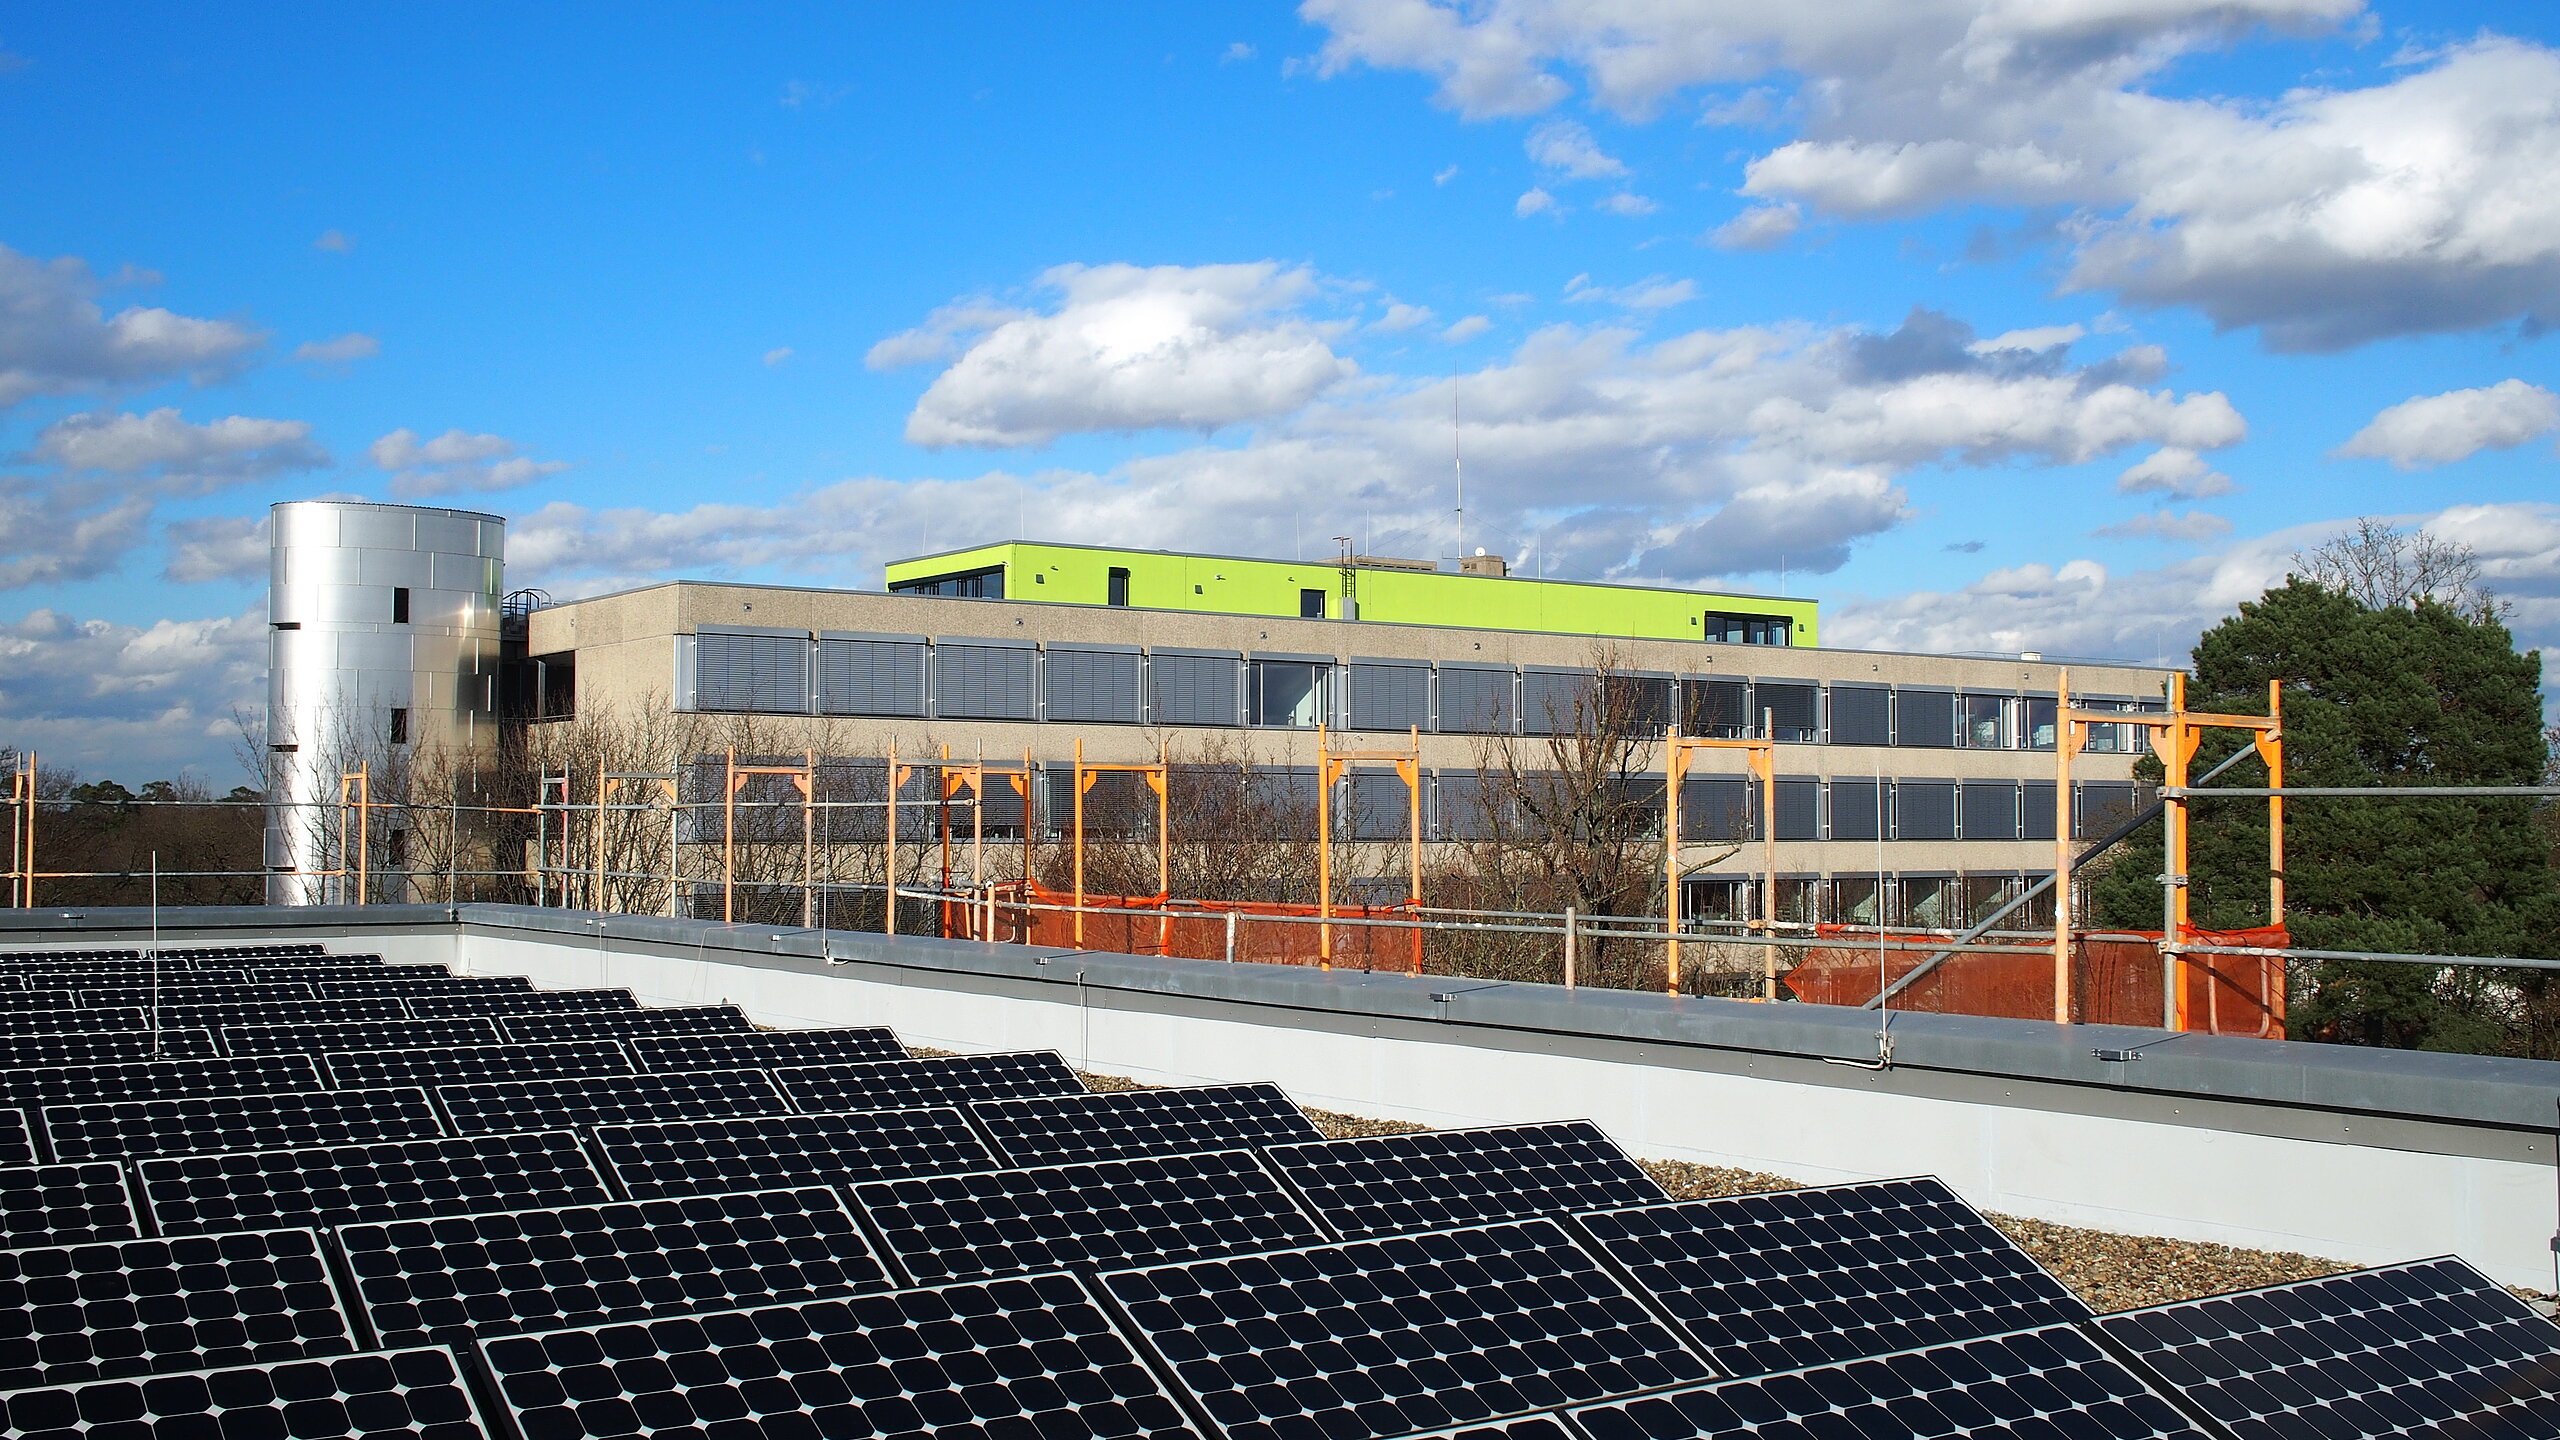 Photovoltaics panels on the roof of a HKA building